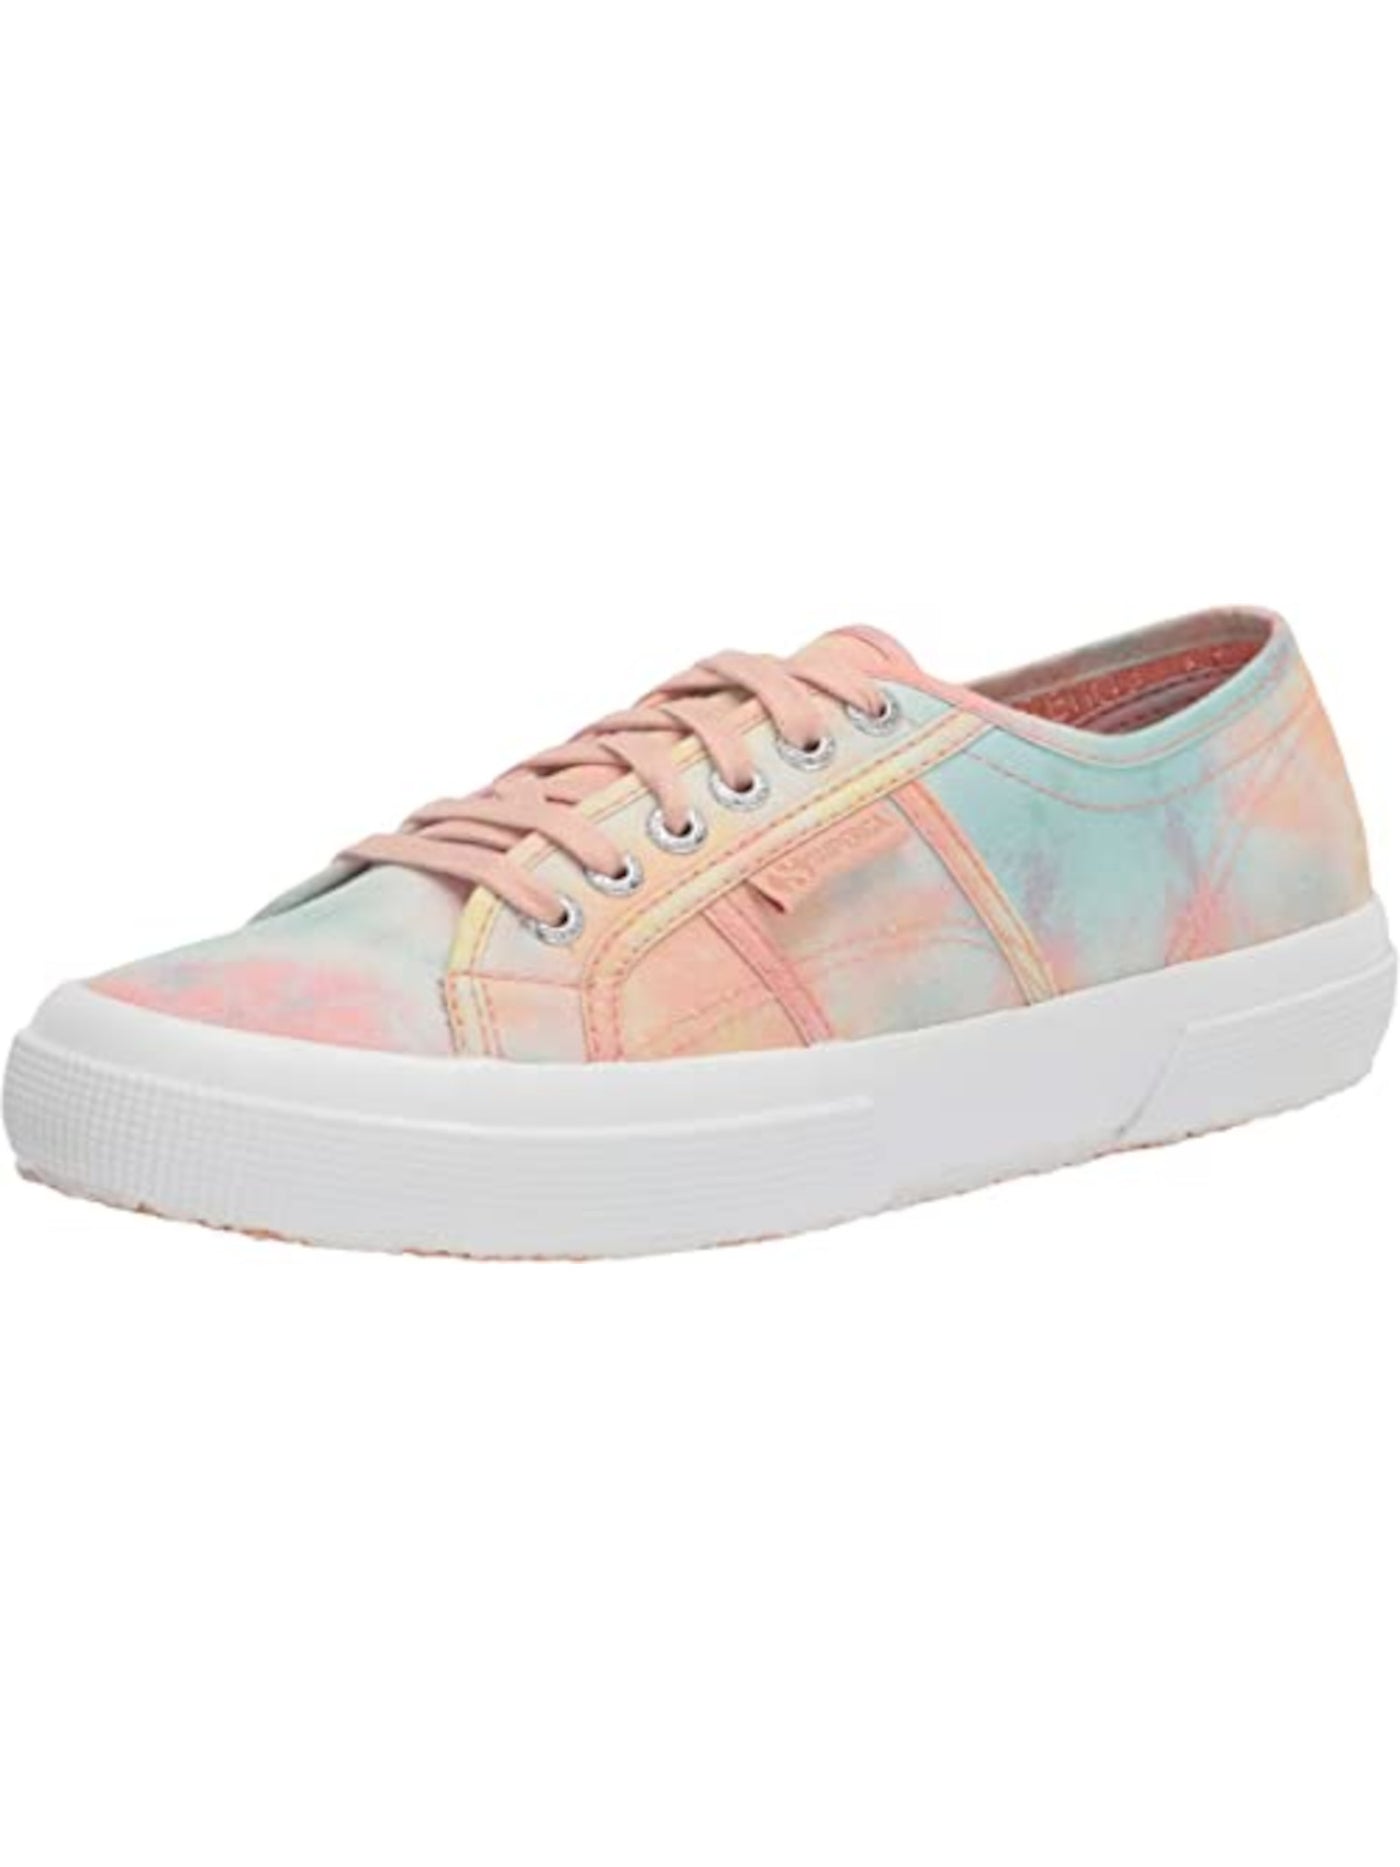 SUPERGA Womens Orange Tie Dye Traction Metal Eyelets Cushioned Logo Fantasy Cotu Round Toe Lace-Up Athletic Sneakers 10